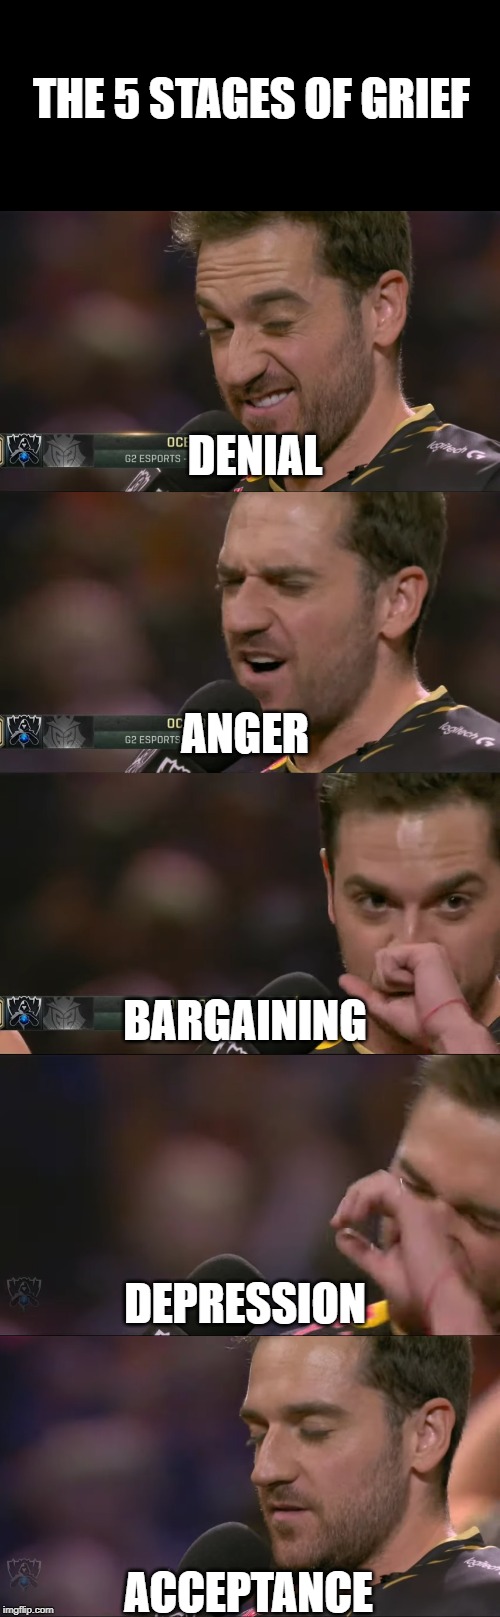 Stages Of Grief Meme